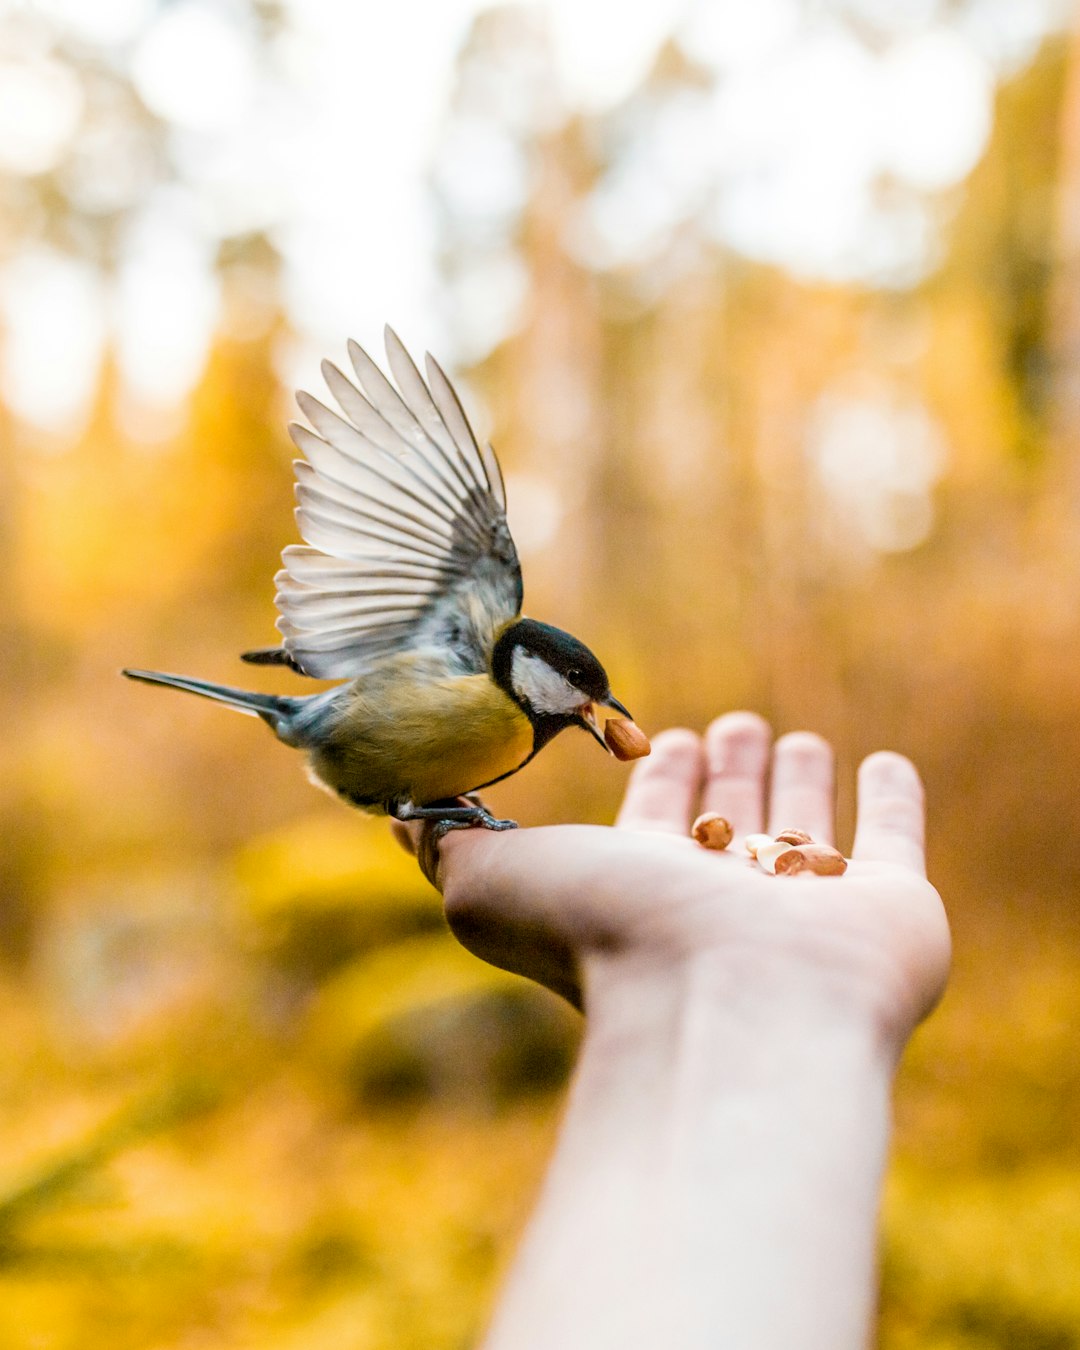 A bird is flying and taking food from the open palm of someone, and there is an autumn forest in the background. The photo was taken with a Canon EOS R5 using natural light. This scene creates a serene atmosphere while highlighting one small creature enjoying its meal. The blurred background adds to the overall tranquility of nature, making it perfect for stock photography. –ar 51:64